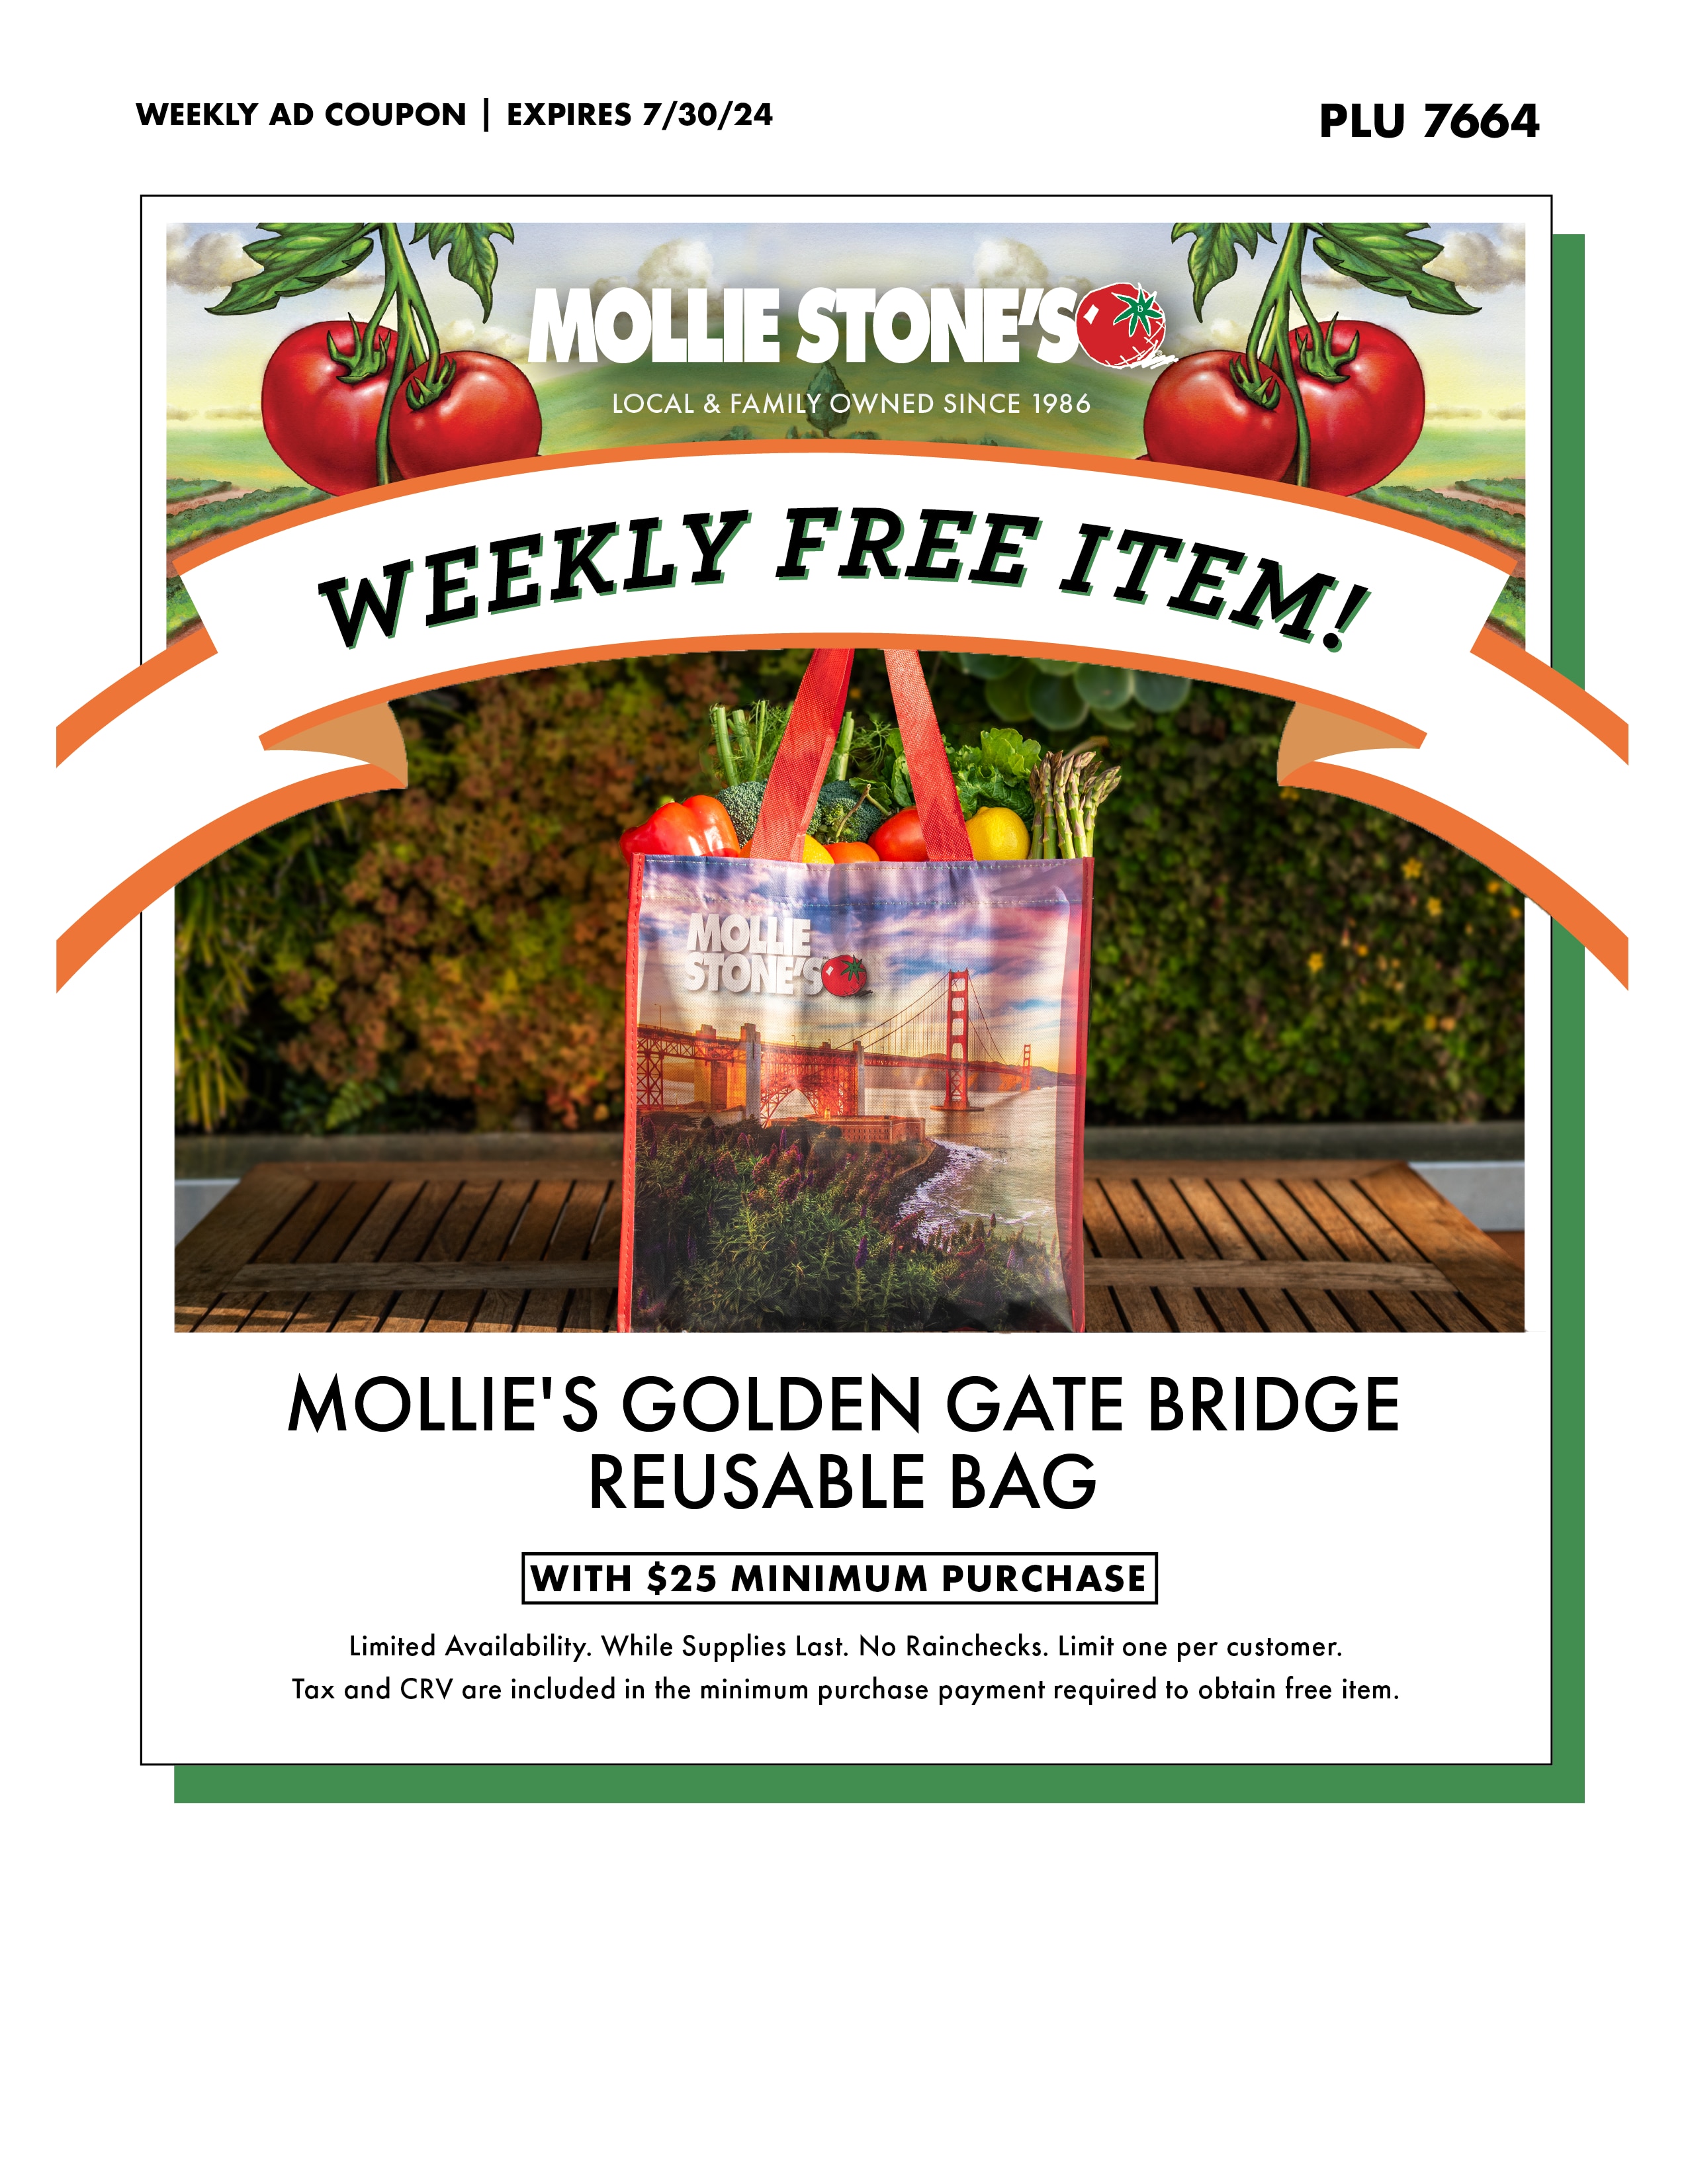 Weekly Ad Coupon, PLU 7664. 
MOLLIE'S GOLDEN GATE BRIDGE
REUSABLE BAG
WITH $25 MINIMUM PURCHASE
Limited Availability. While Supplies Last. No Rainchecks. Limit one per customer.
Tax and CRV are included in the minimum purchase payment required to obtain free item.